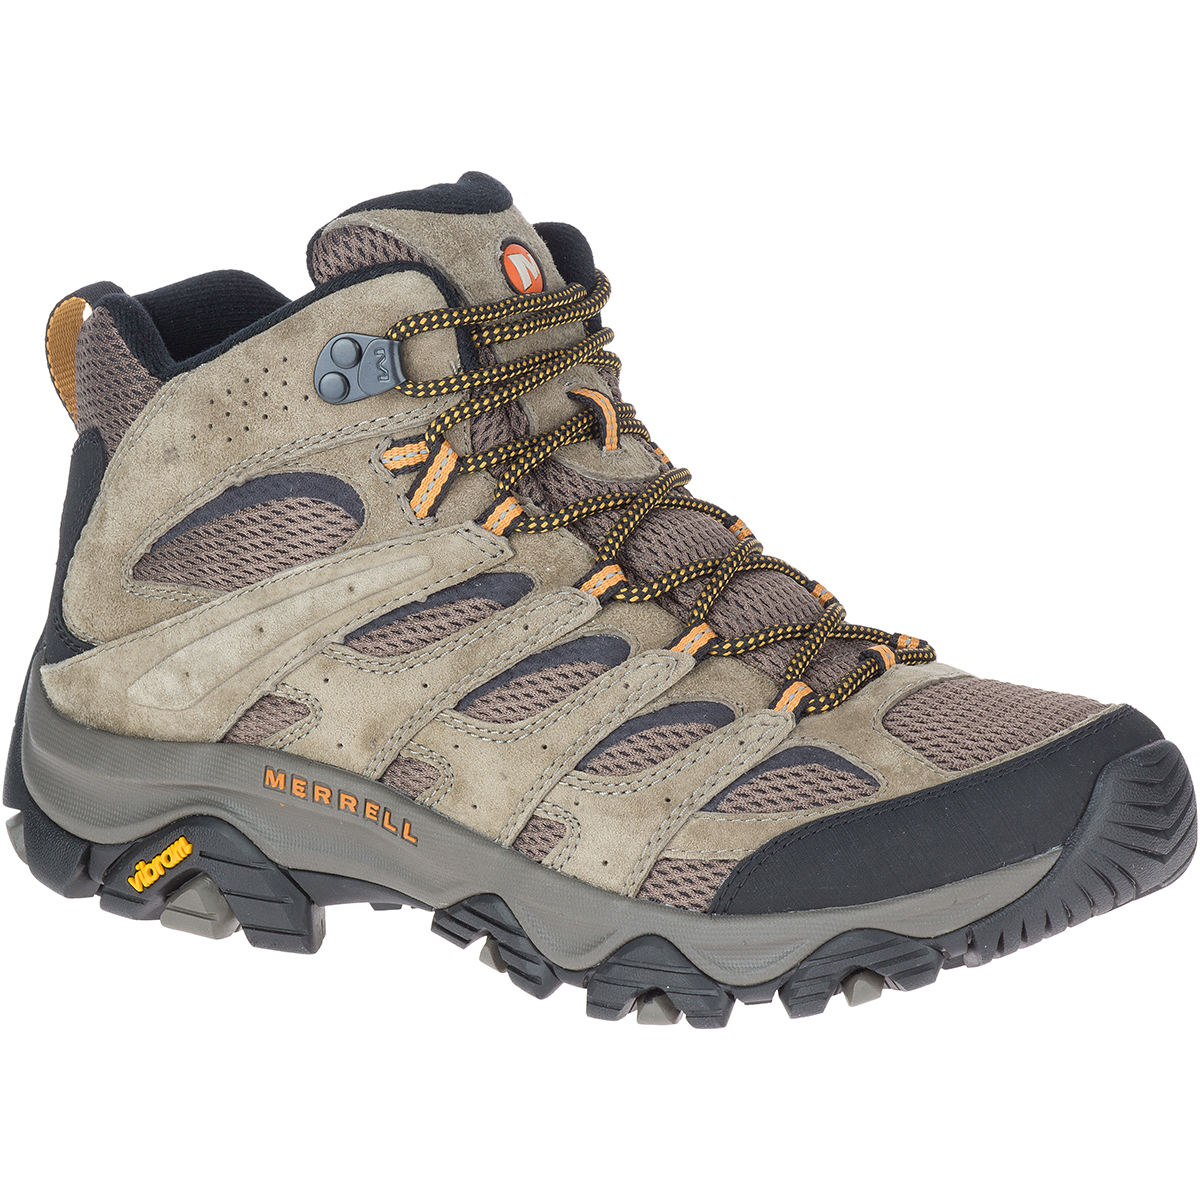 Merrell Men's Moab 3 Mid Hiking Boots, Wide